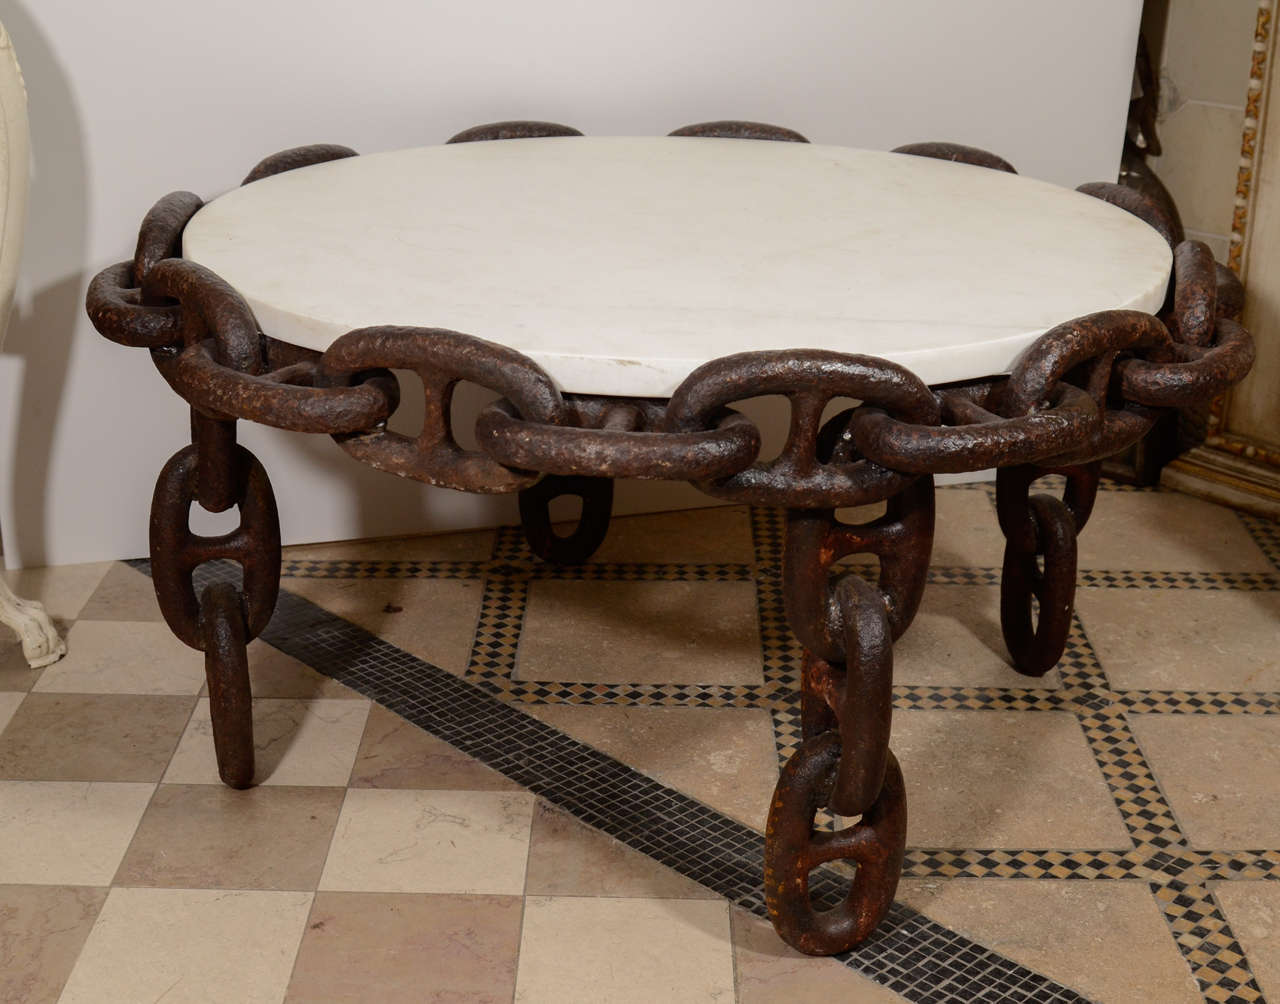 This beautiful round chain table made by Olde Good Things was featured on the front cover of House Beautiful magazine, July/August 2012. Made from salvaged anchor chain. The top is marble that was salvaged from the lobby of a downtown New York City